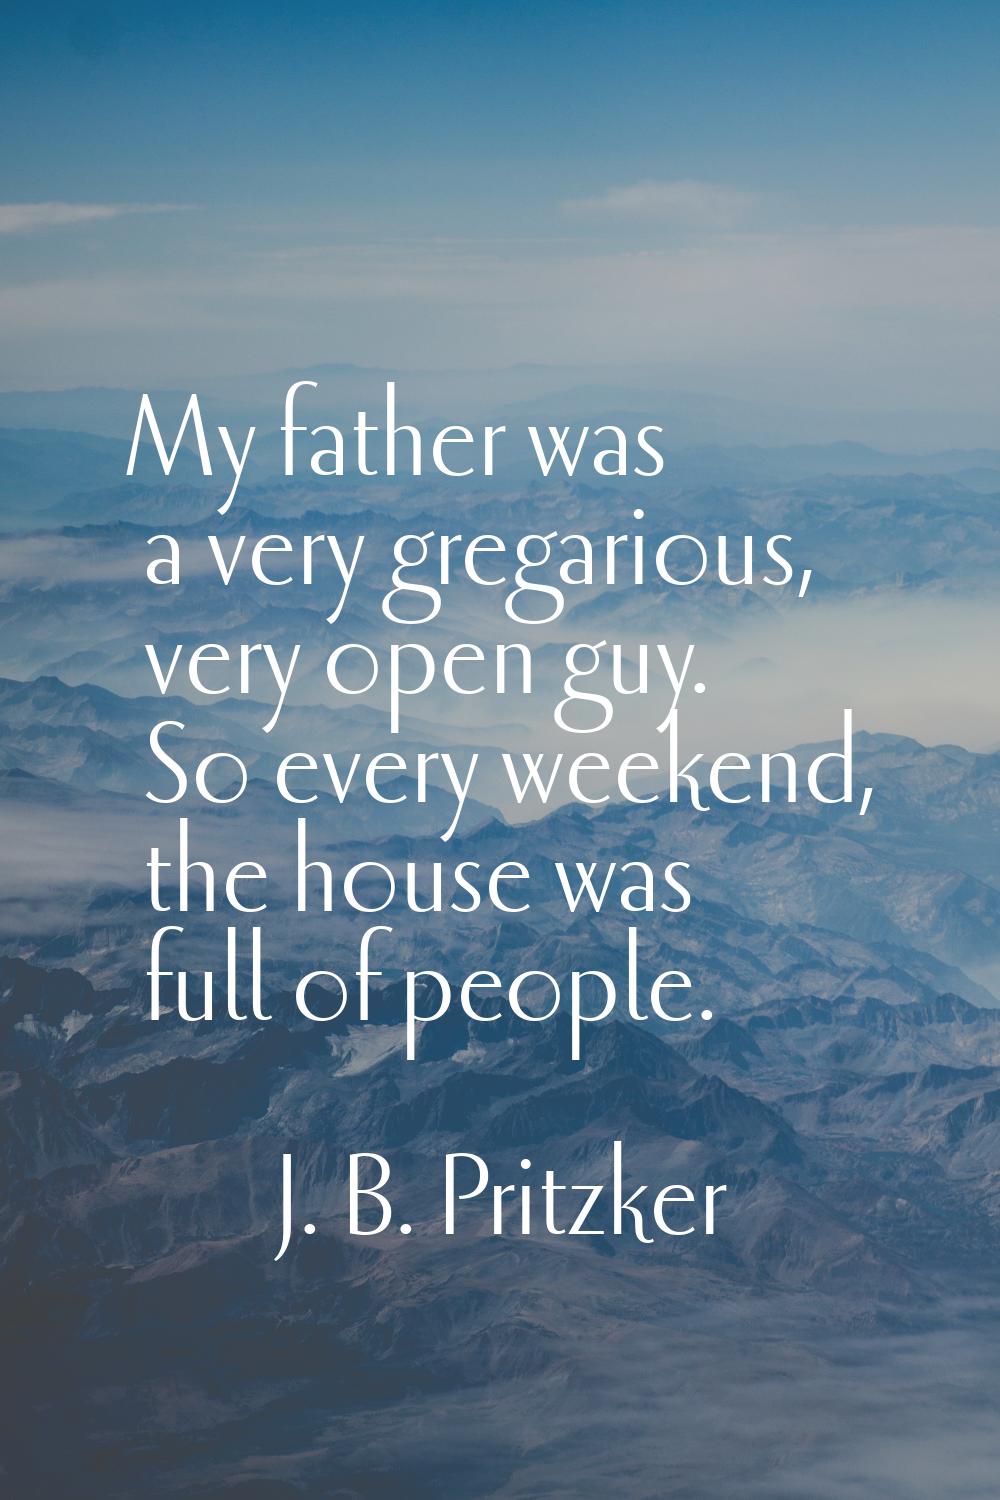 My father was a very gregarious, very open guy. So every weekend, the house was full of people.